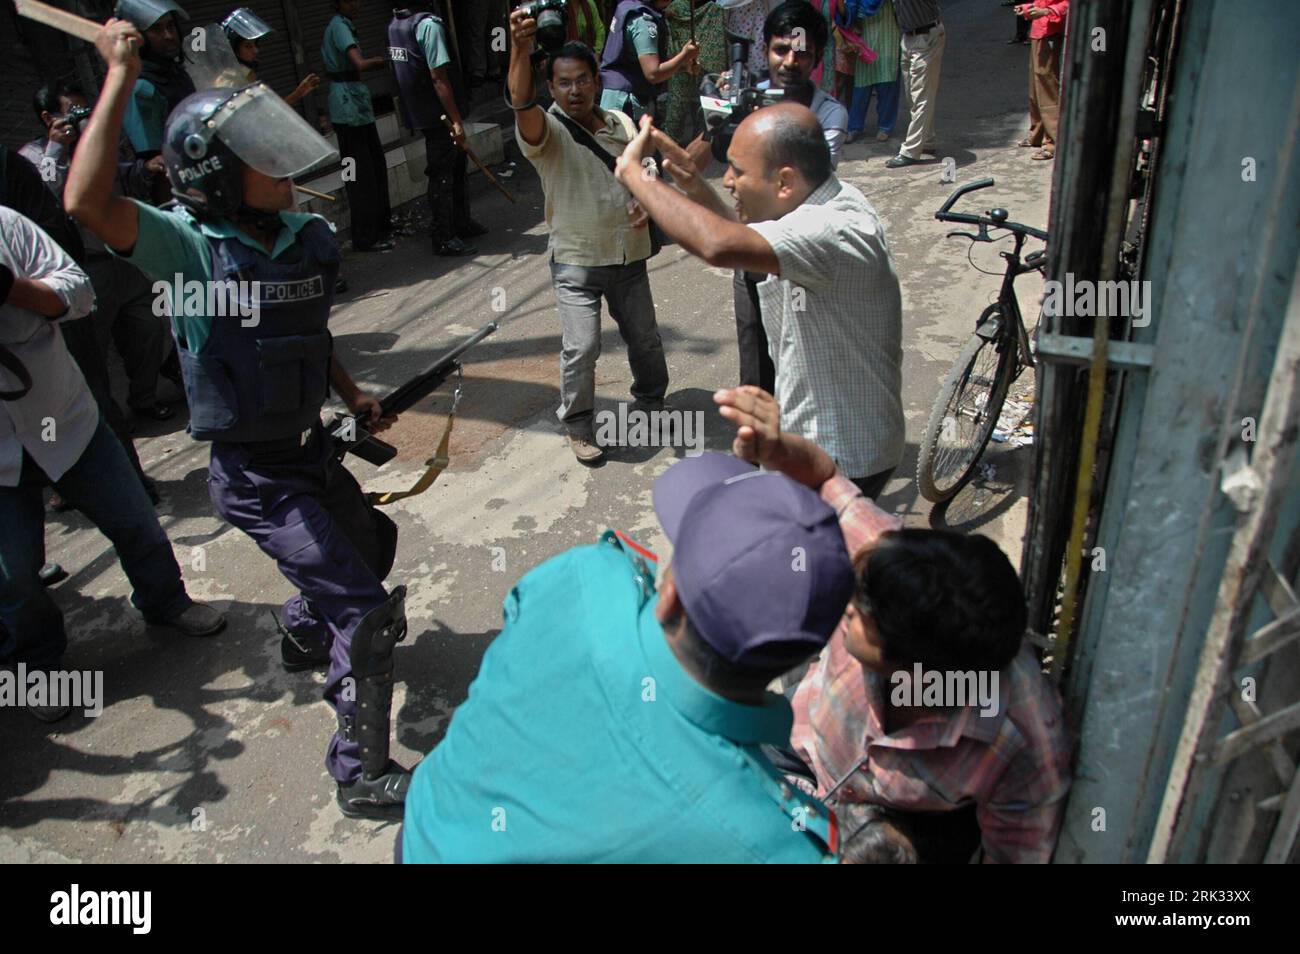 Bildnummer: 53313923  Datum: 02.09.2009  Copyright: imago/Xinhua (090902) -- DHAKA, Sept. 2, 2009 (Xinhua) -- A policeman charges baton on an activist of the National Committee to Protect Oil, Gas, Mineral Resources, Power and Ports in Dhaka, capital of Bangladesh, on Sept. 2, 2009. At least 15 were injured on Wednesday as policemen clashed with activists while they protested against the government s decision to select U.S. company ConocoPhilips and Ireland s Tullow for gas and oil extraction in nine offshore blocks in the Bay of Bengal of the country. (Xinhua/Qamruzzaman) (4)BANGLADESH-DHAKA- Stock Photo